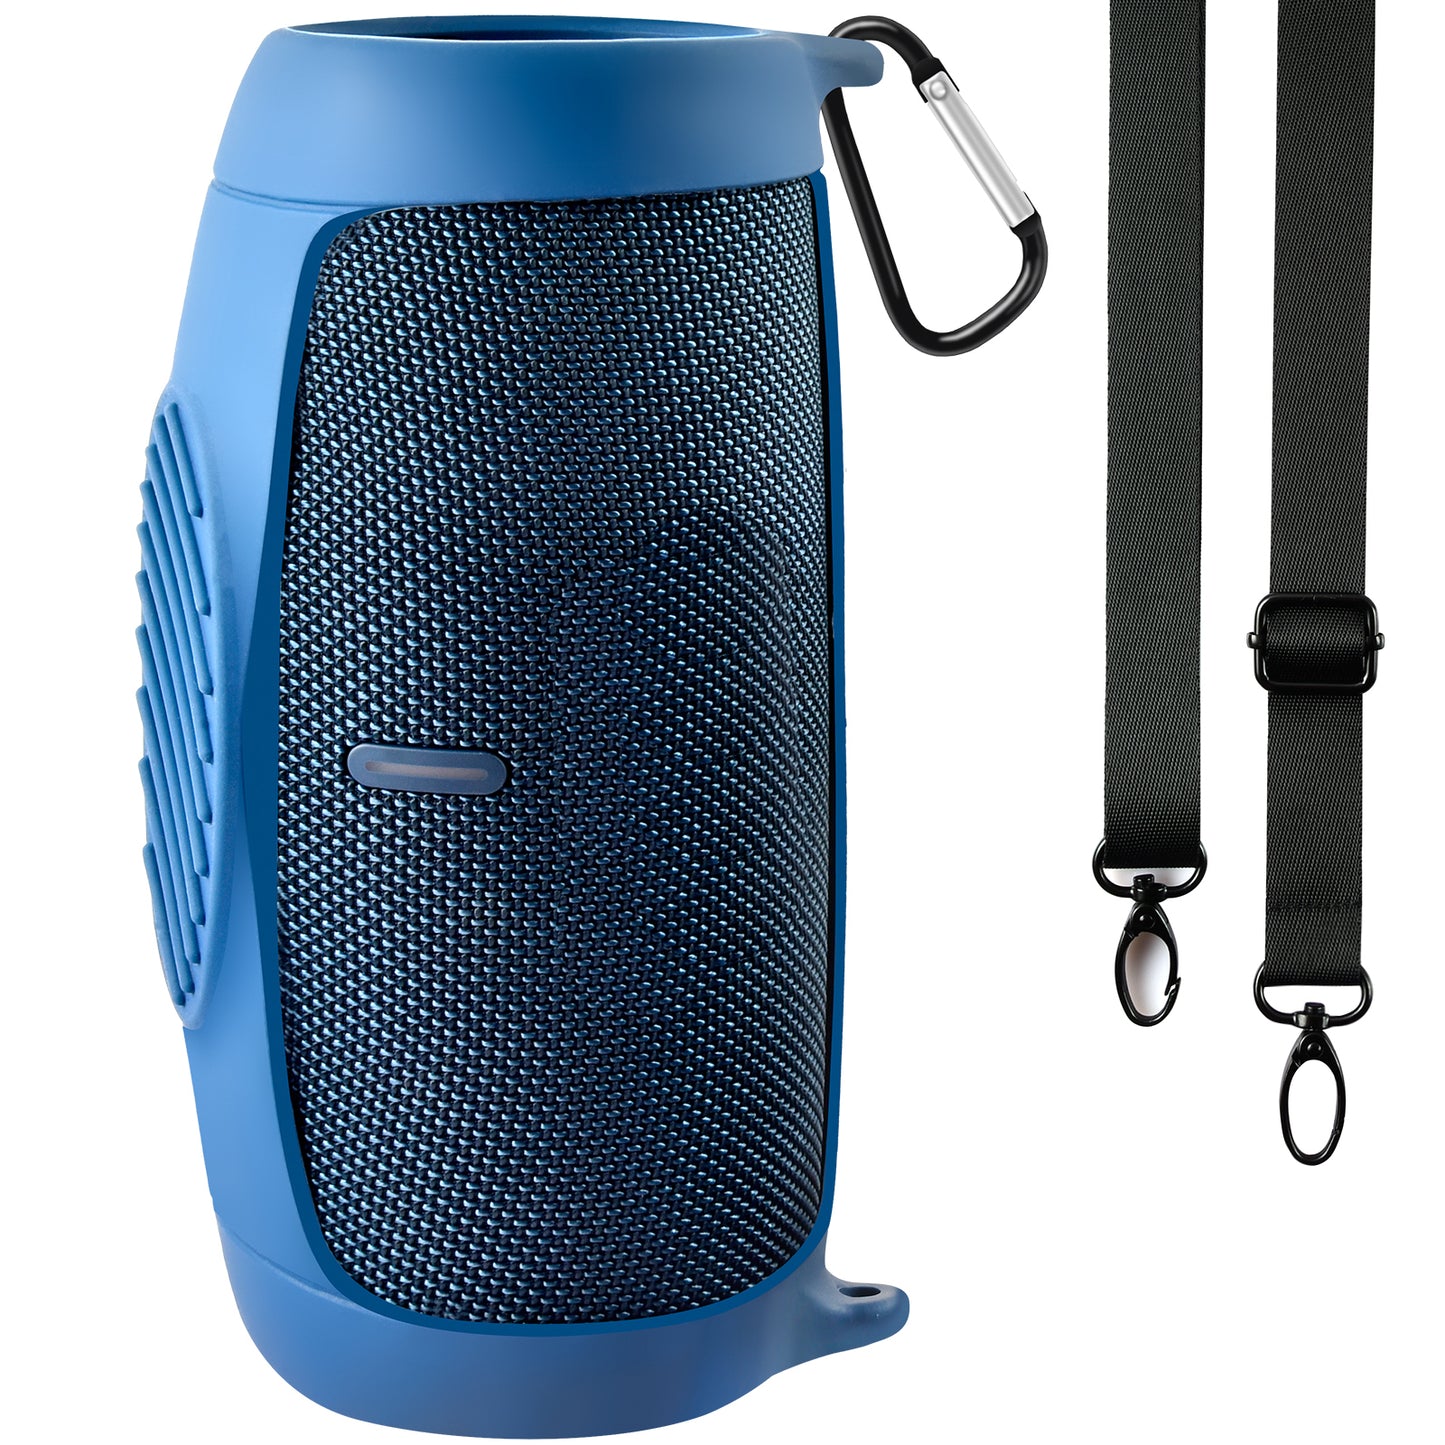 Silicone Case Cover for JBL Charge 5 Portable Bluetooth Speaker, Travel Gel Soft Skin,Waterproof Rubber Carrying Pouch with Strap(Blue)